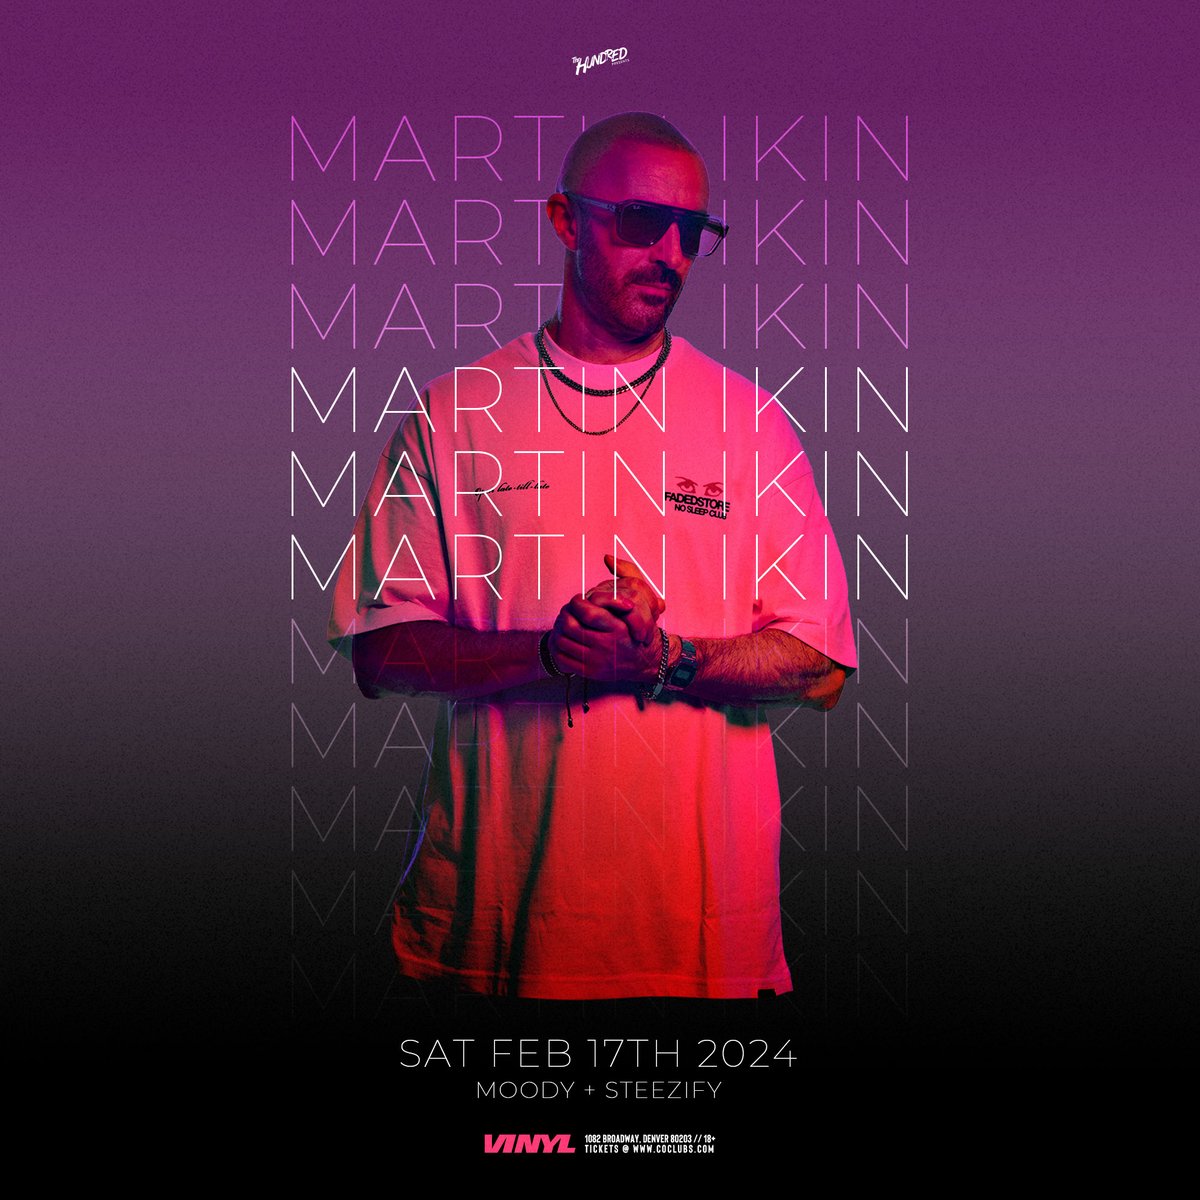 DJing & producing since 1991, tech house titan @Martin_Ikin is a staple of the global scene We are stoked to host Martin Ikin on his return to Denver Saturday, February 17 at Club Vinyl Tickets - bit.ly/CLUBVINYL-MART…